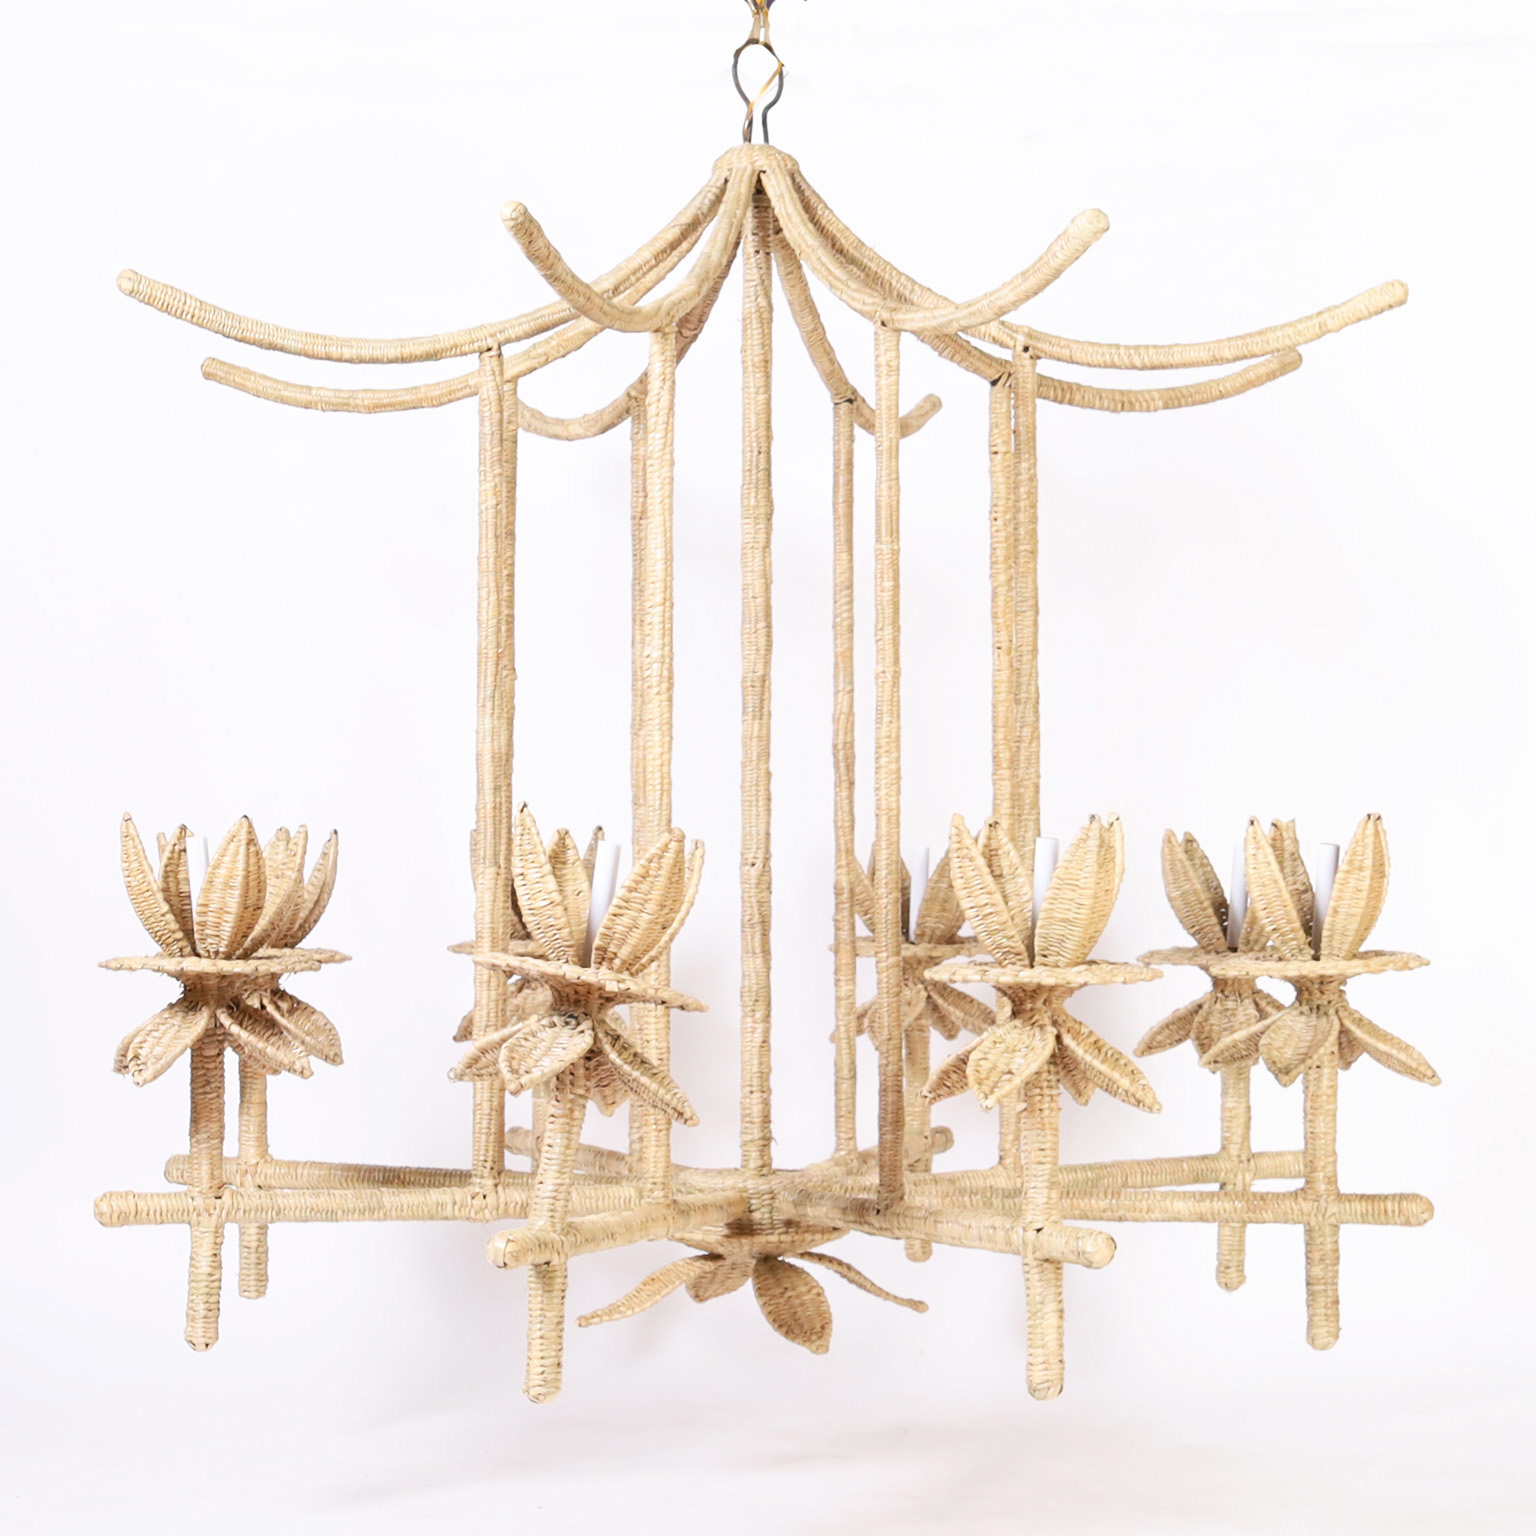 The Seychelles Woven Reed Pagoda Form Chandelier or Light Fixture from the FS Flores Collection